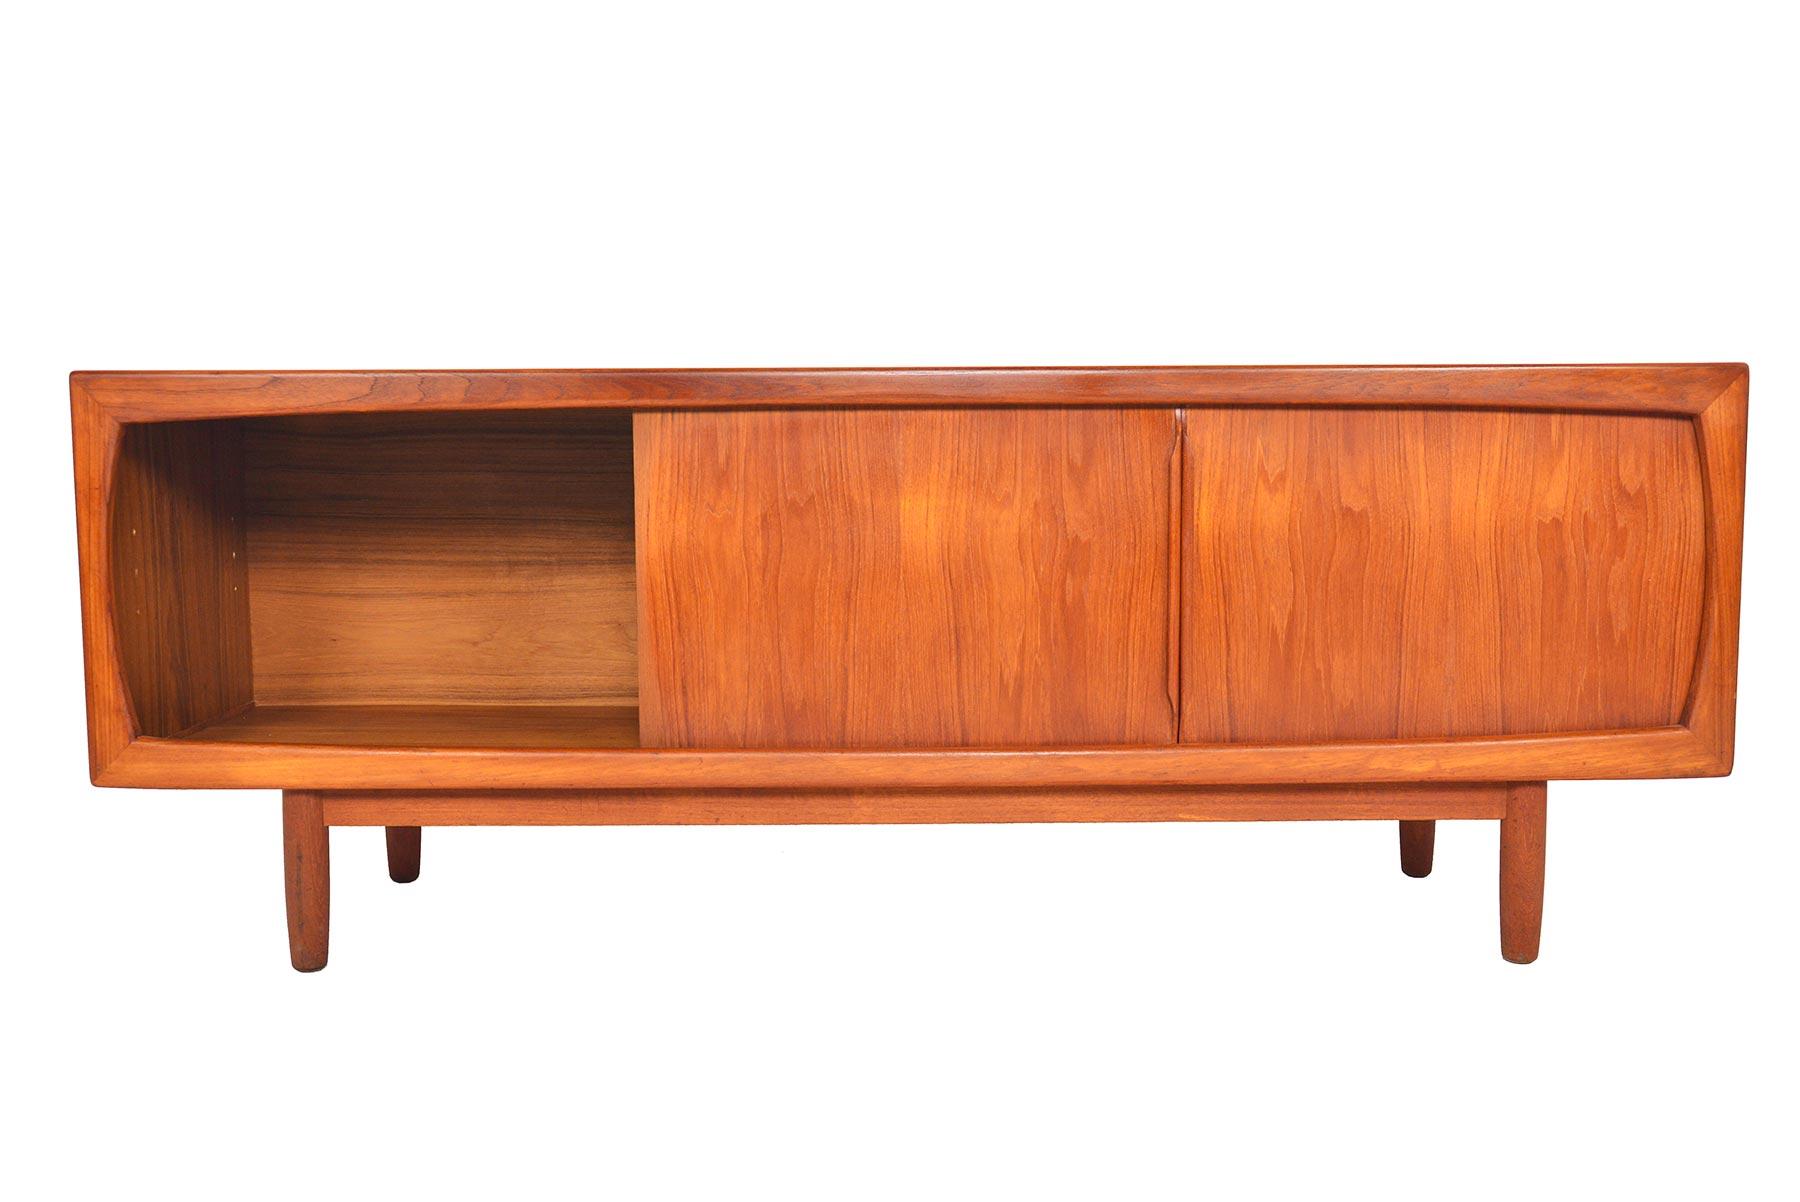 This beautiful Danish modern midcentury teak credenza offers a wonderfully functional configuration for modern living! Executed with clean lines and Minimalist details, left and right doors slide open to open bays. Four center drawers provide